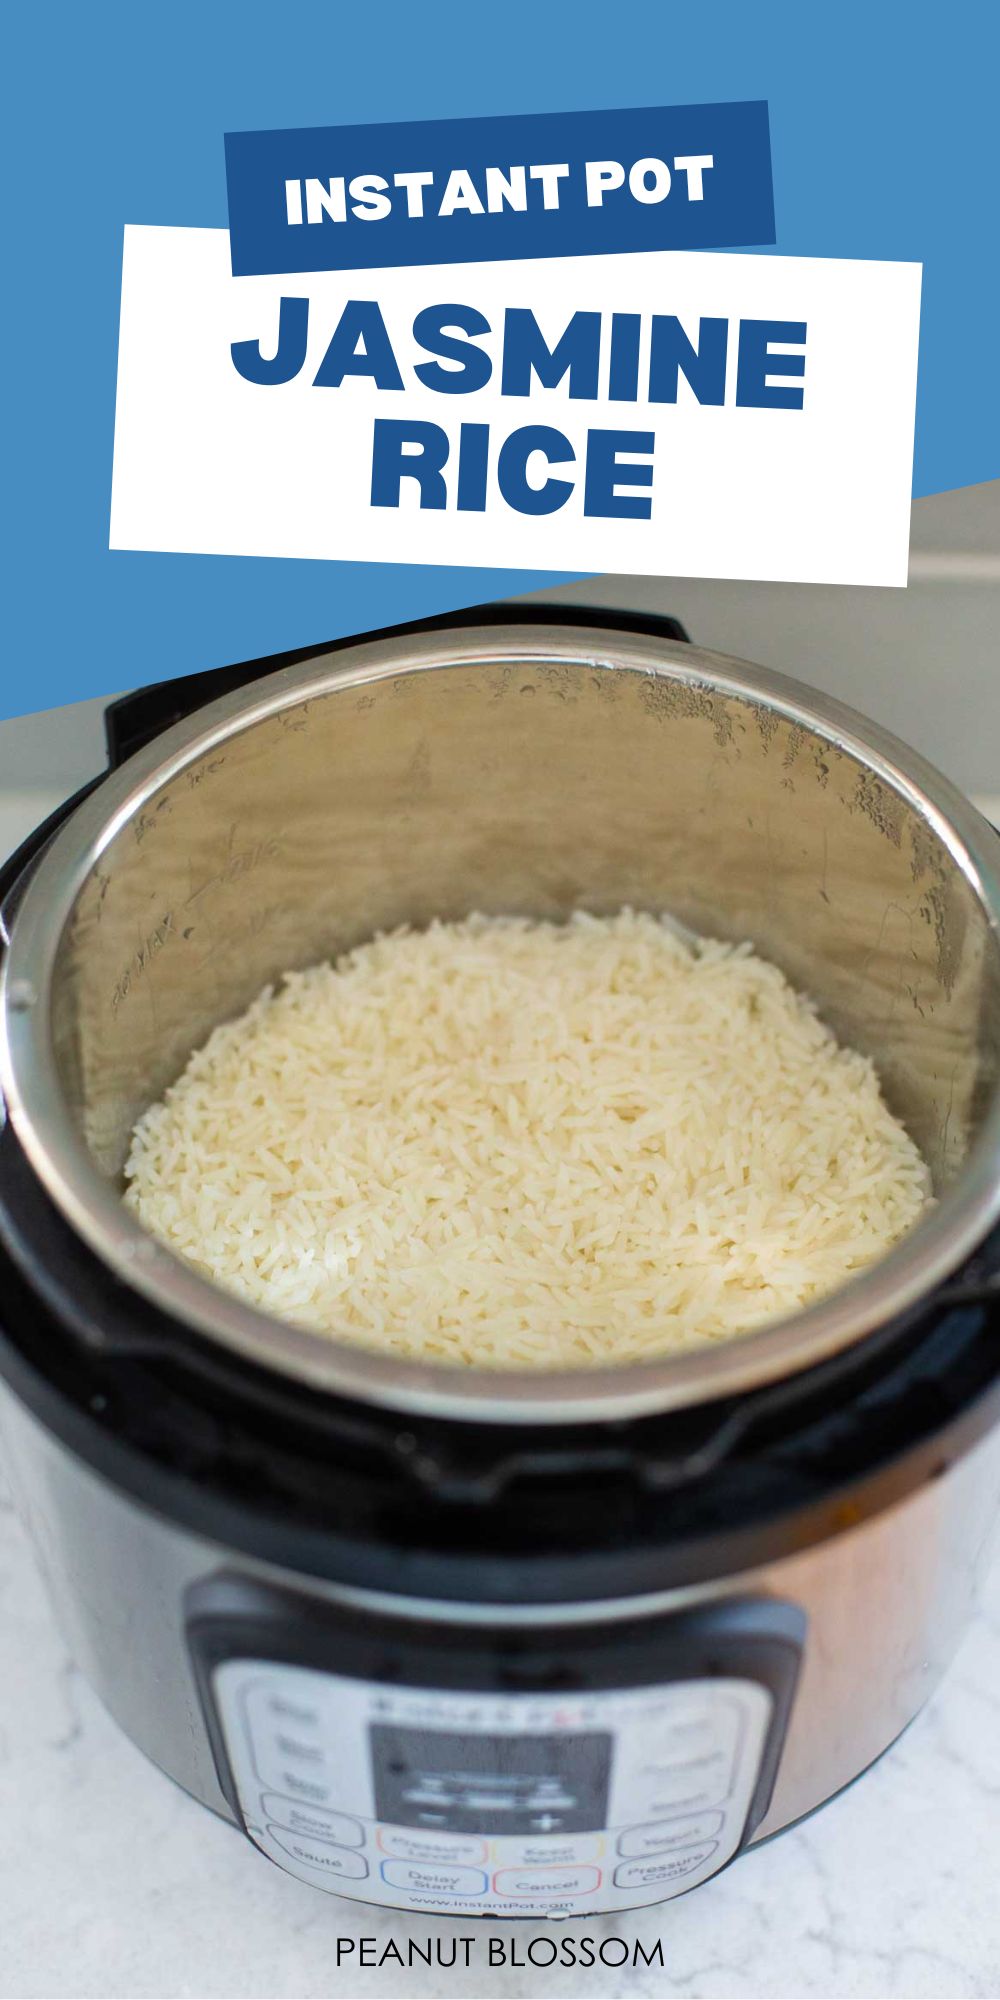 The rice has been cooked inside the Instant Pot.